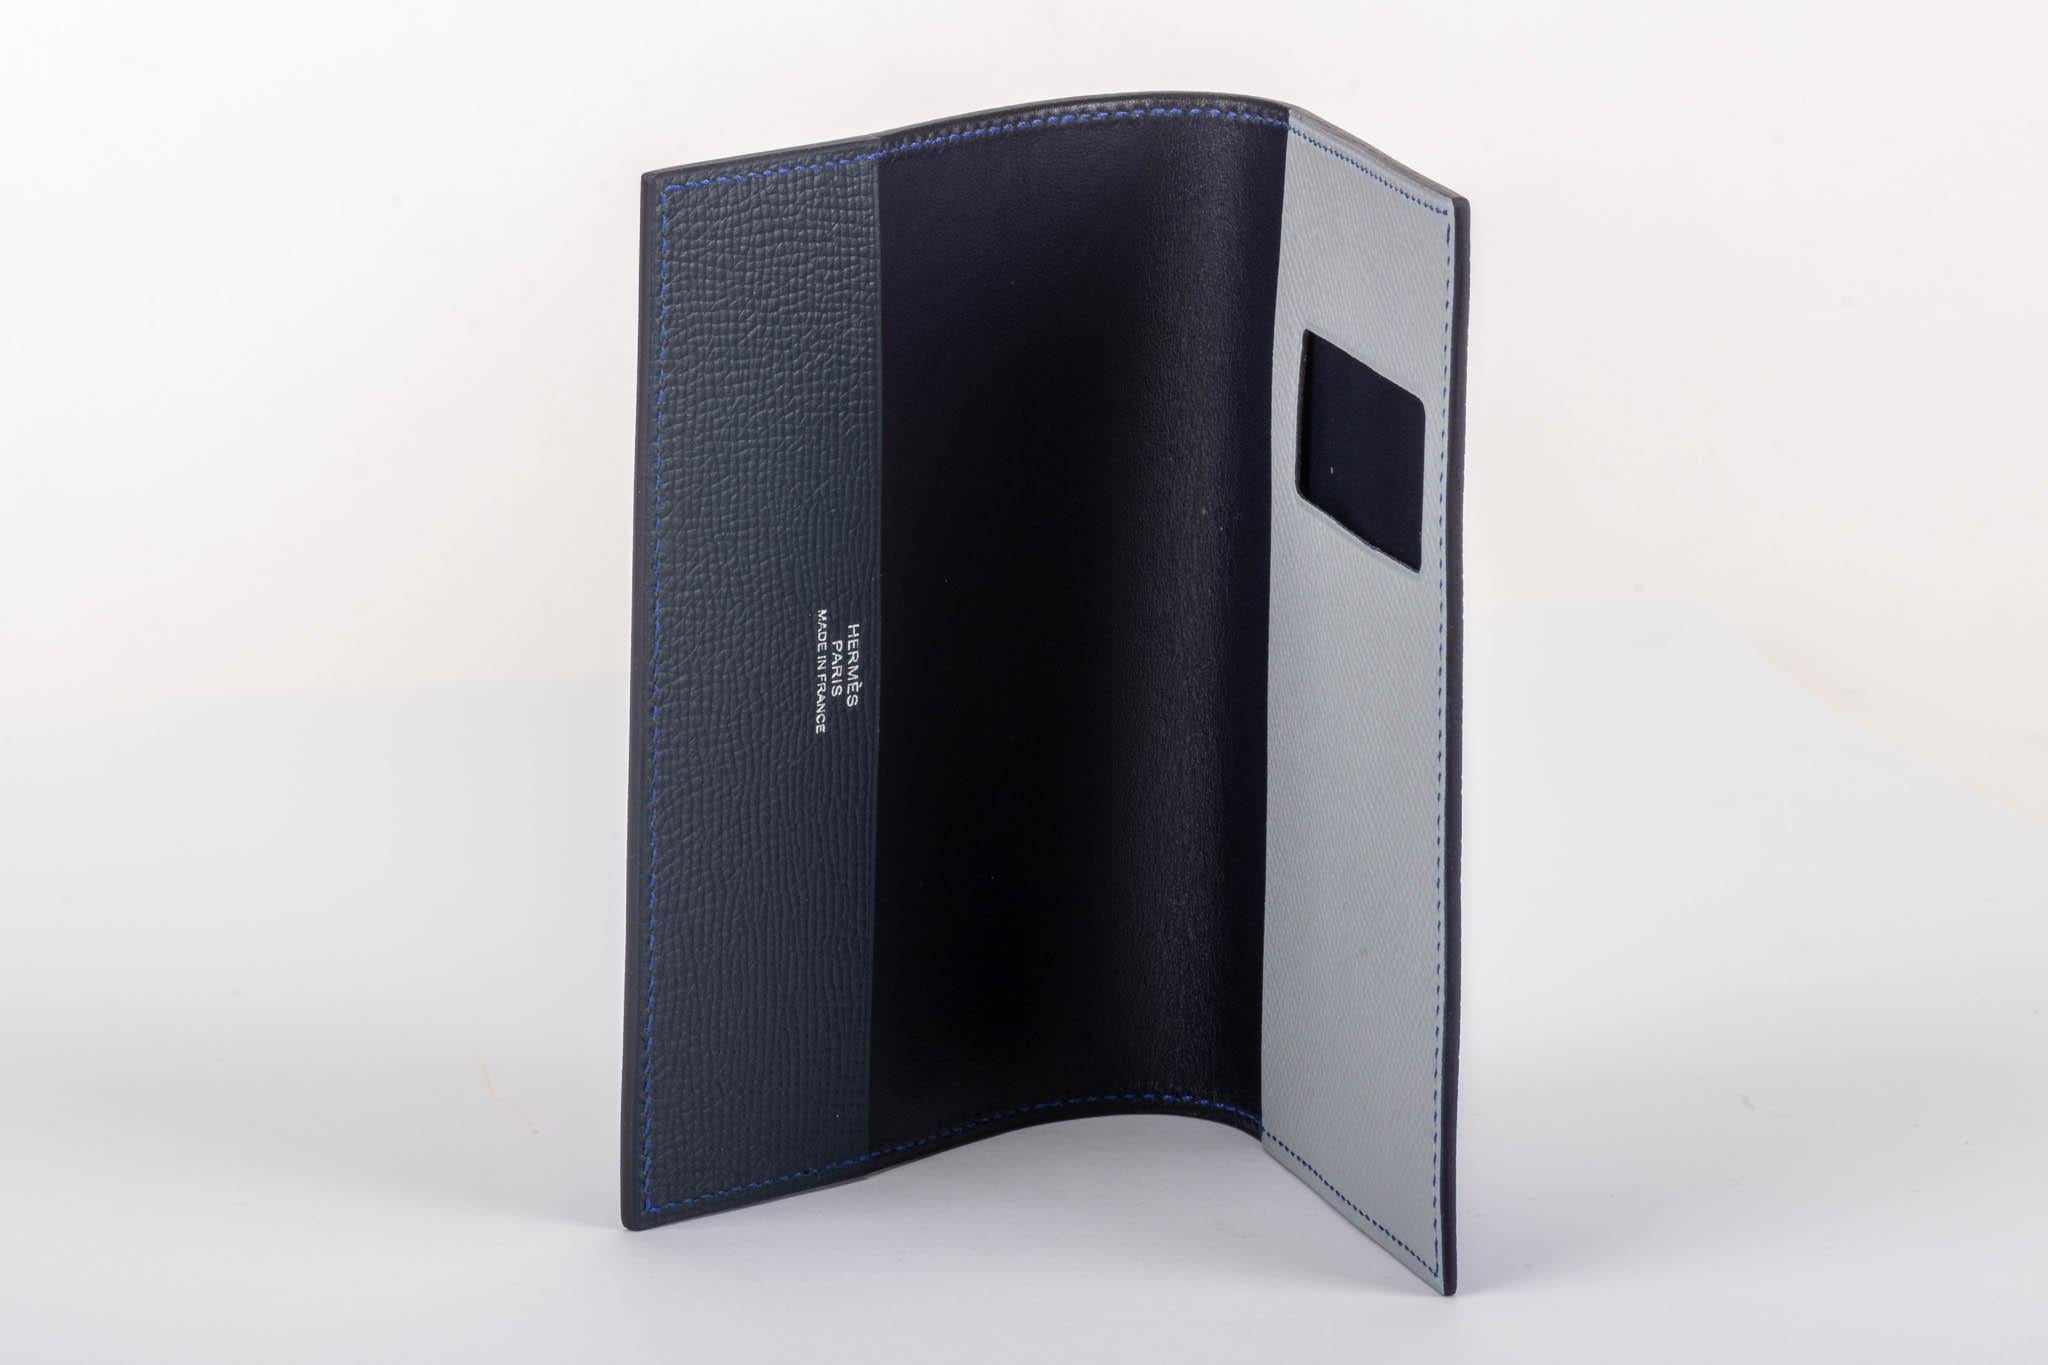 Hermes brand new in box tricolor electric blue passport holder in epsom leather . Comes with original box and ribbon.